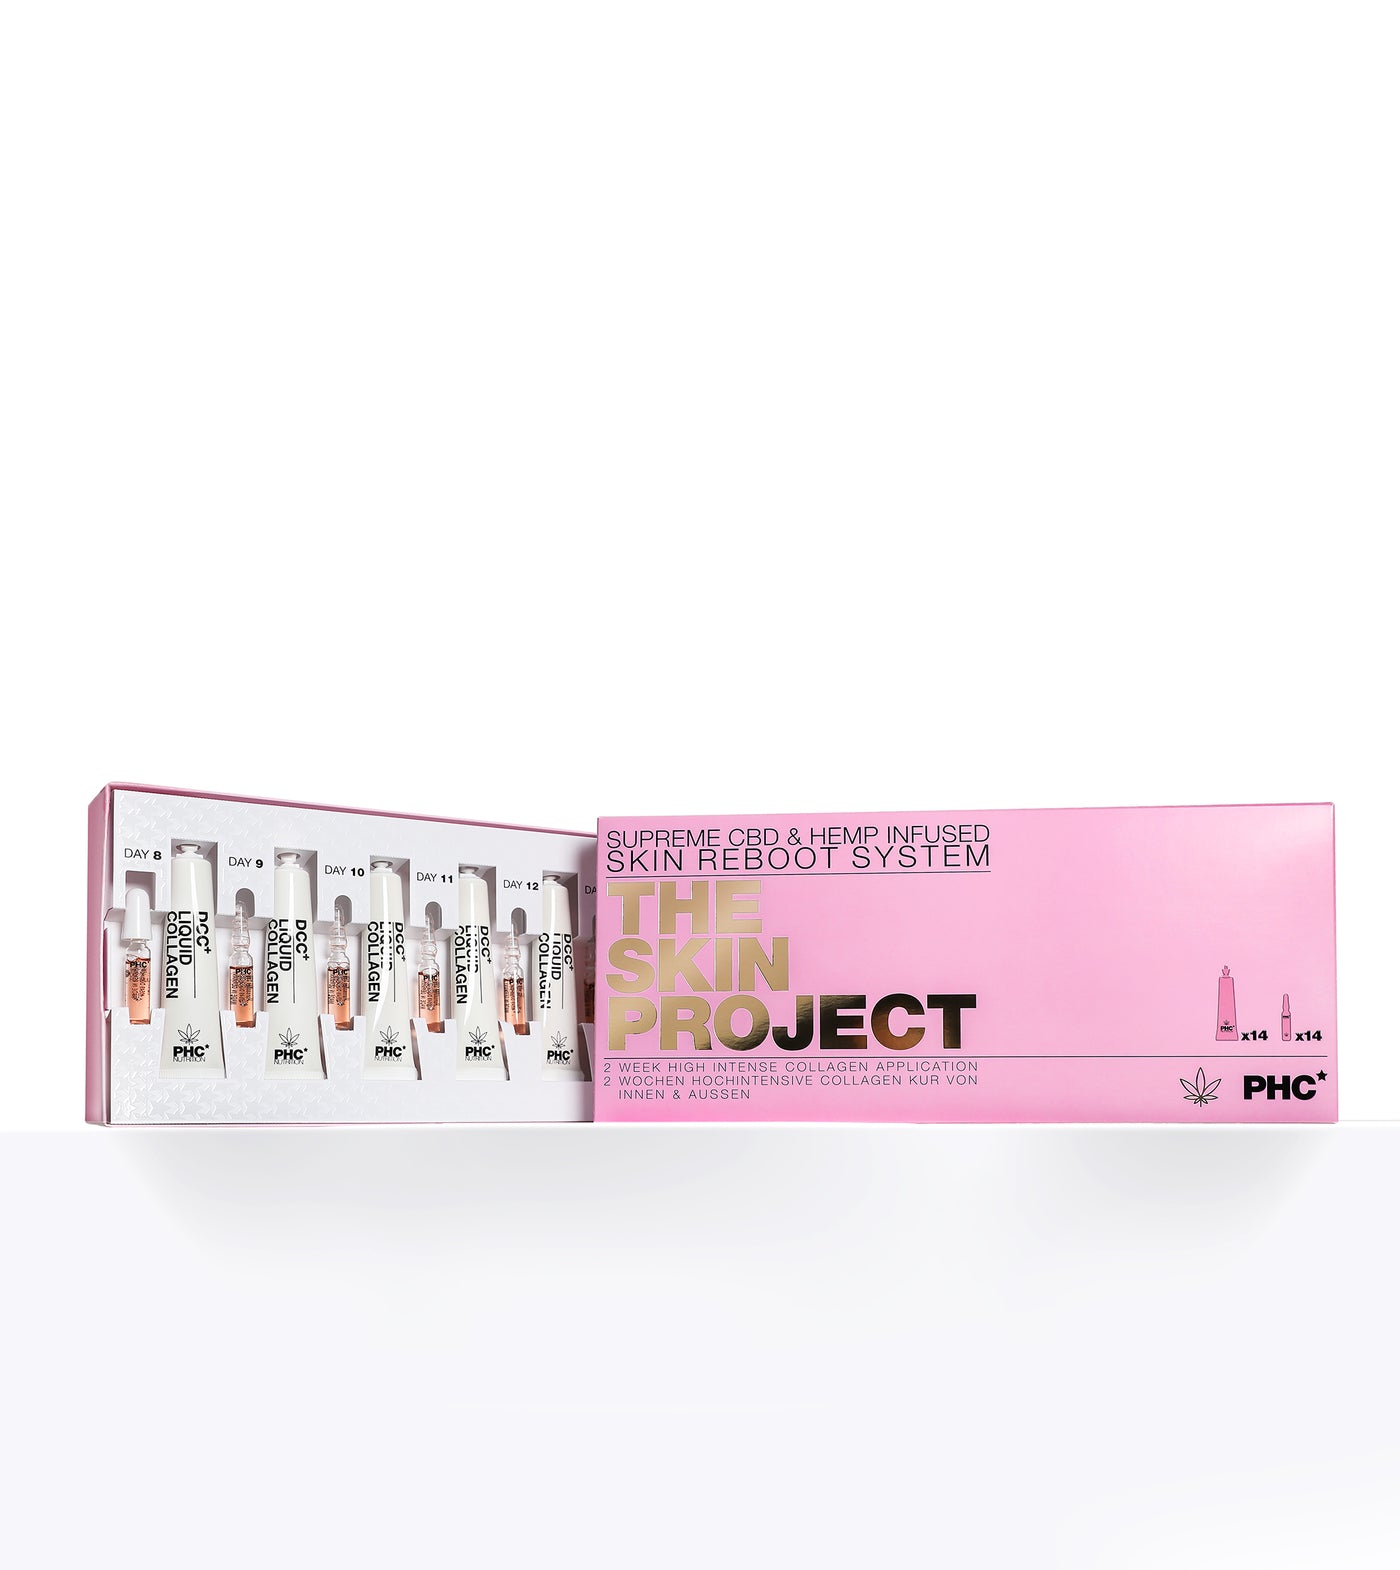 THE SKIN PROJECT